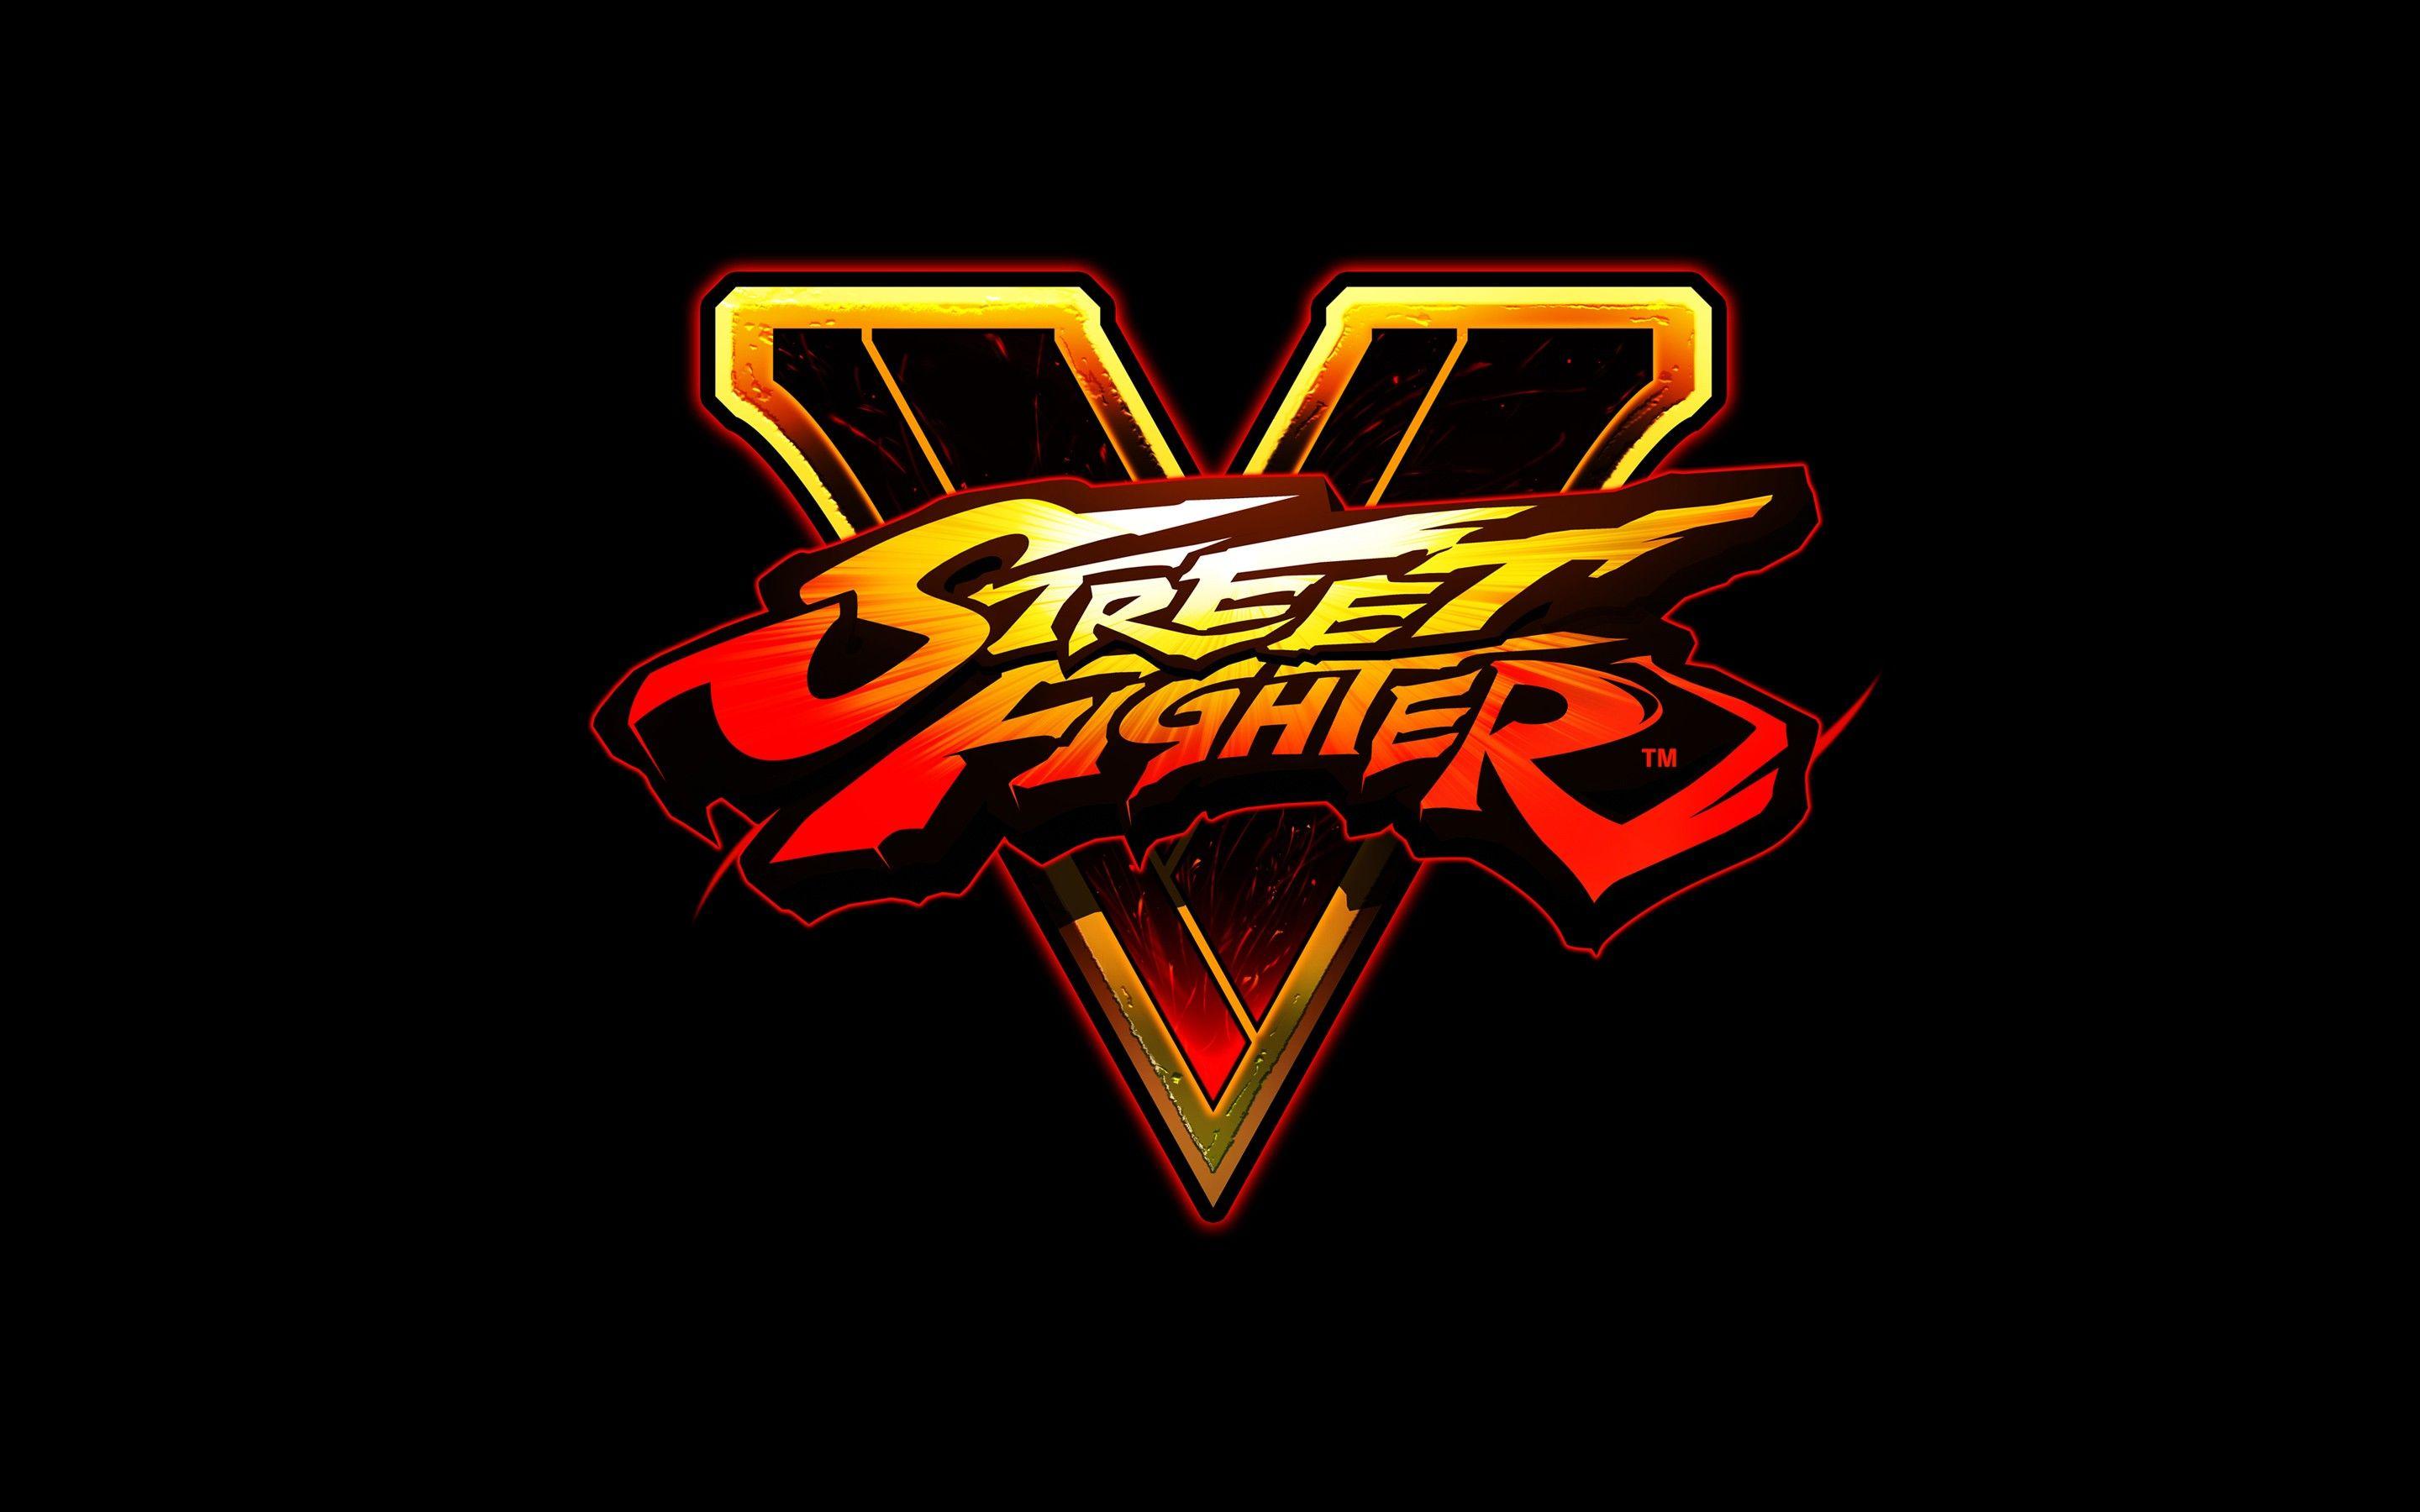 Street Fighter 5 wallpapers ·① Download free stunning wallpapers for